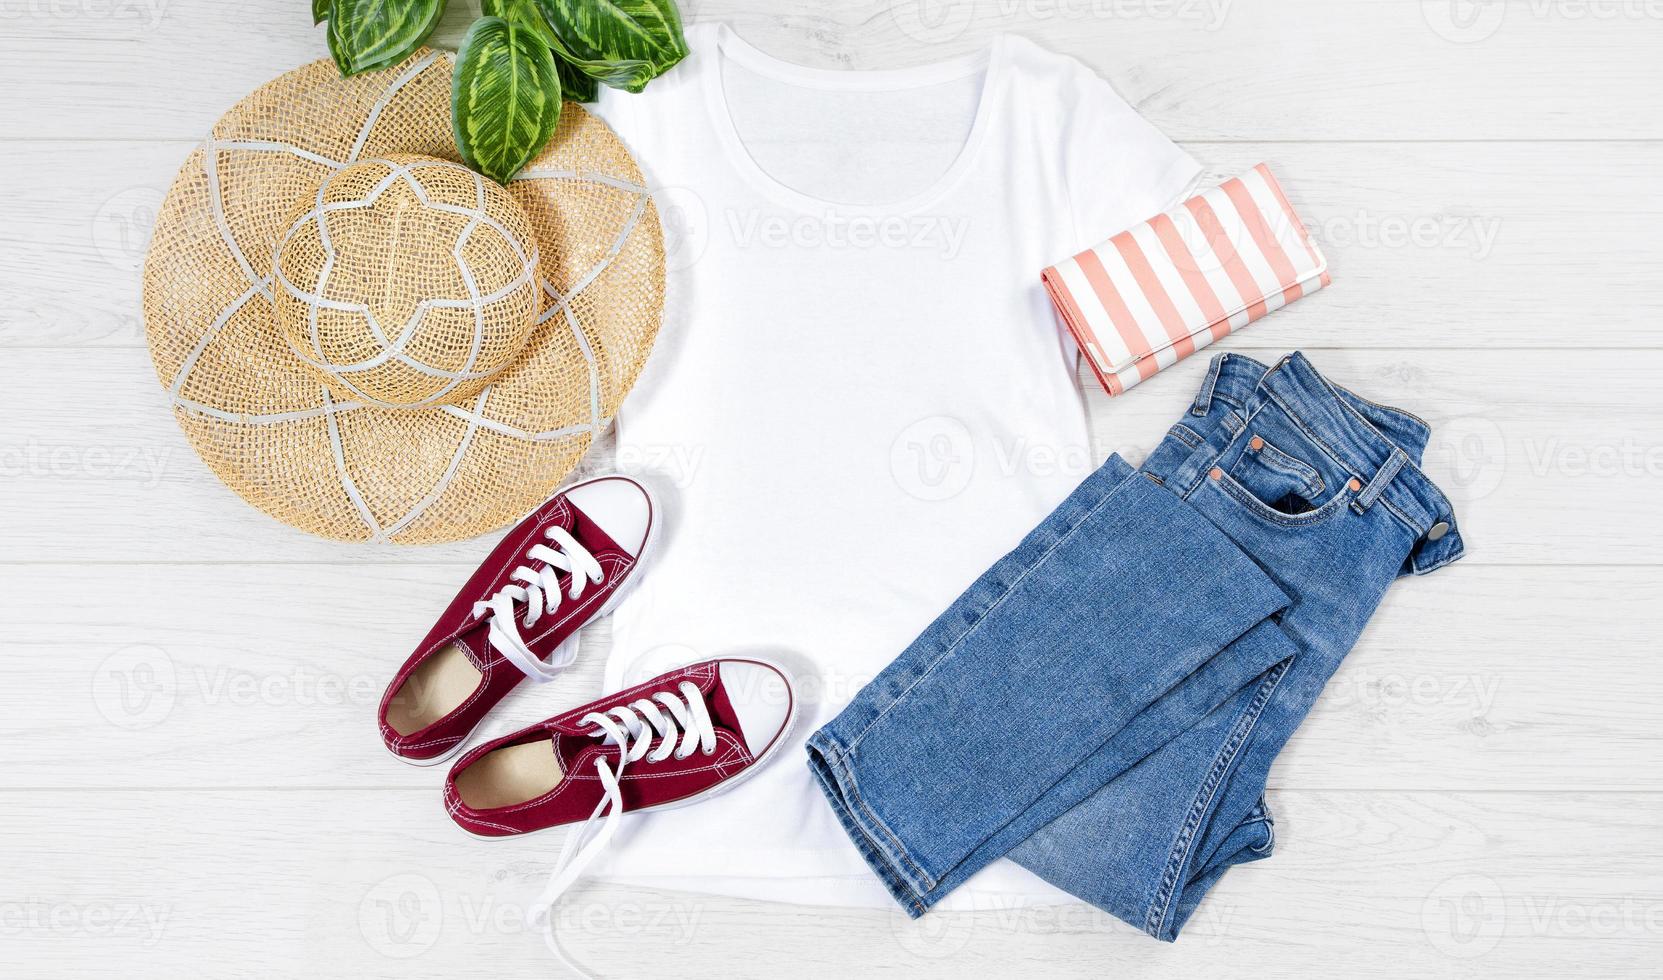 T shirt white and sneakers. T-shirt Mockup flat lay with summer accessories. Hat, jeans and sneakers on wooden floor background. Copy space. Template blank canvas. Front top view. photo